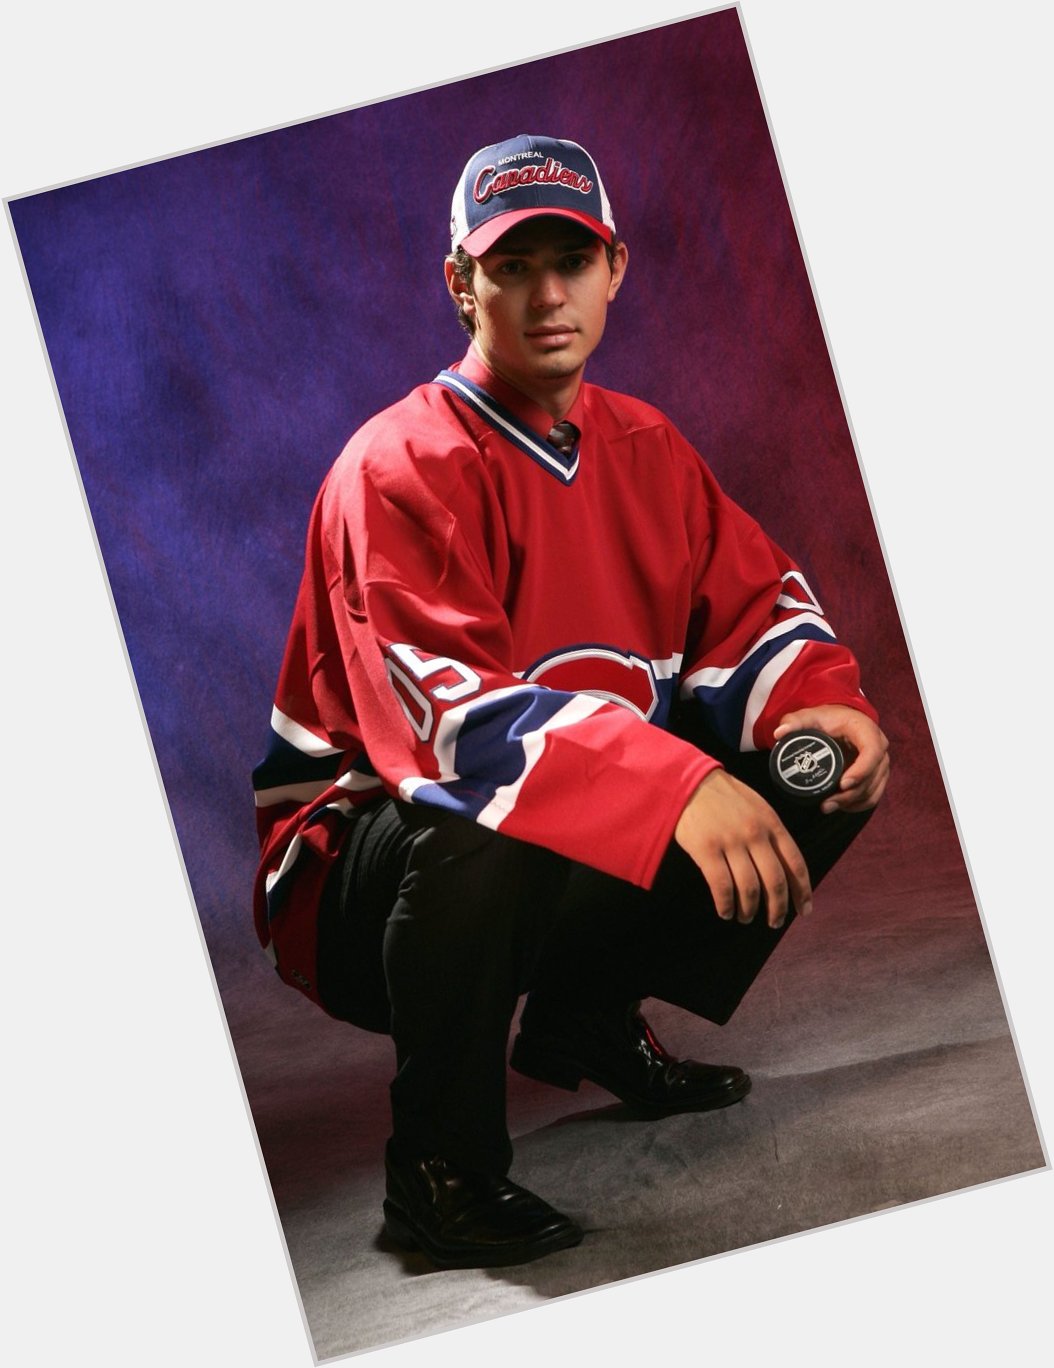 Happy birthday to the fucking goat, Carey Price. Solid cholo stance might I add. 